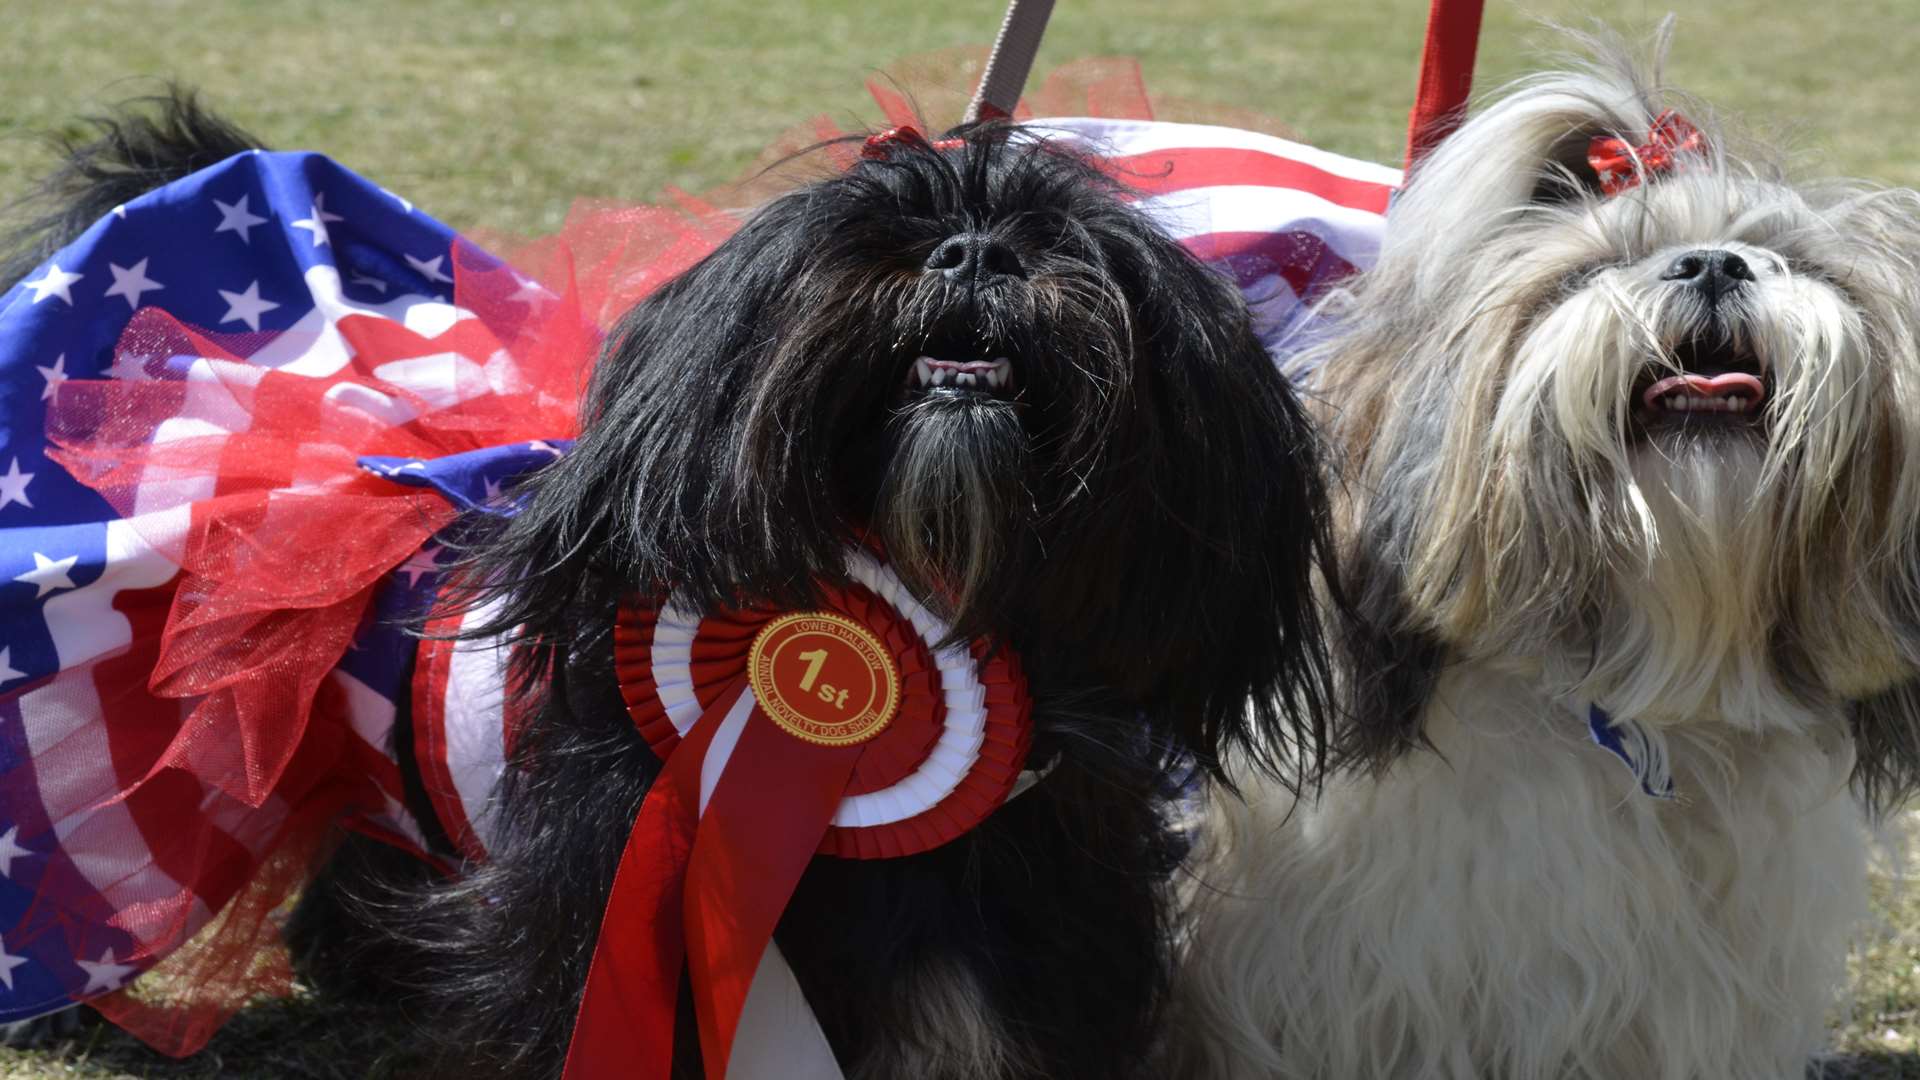 The two winners of the fancy dress categories show off their American Independence Day- themed outfits